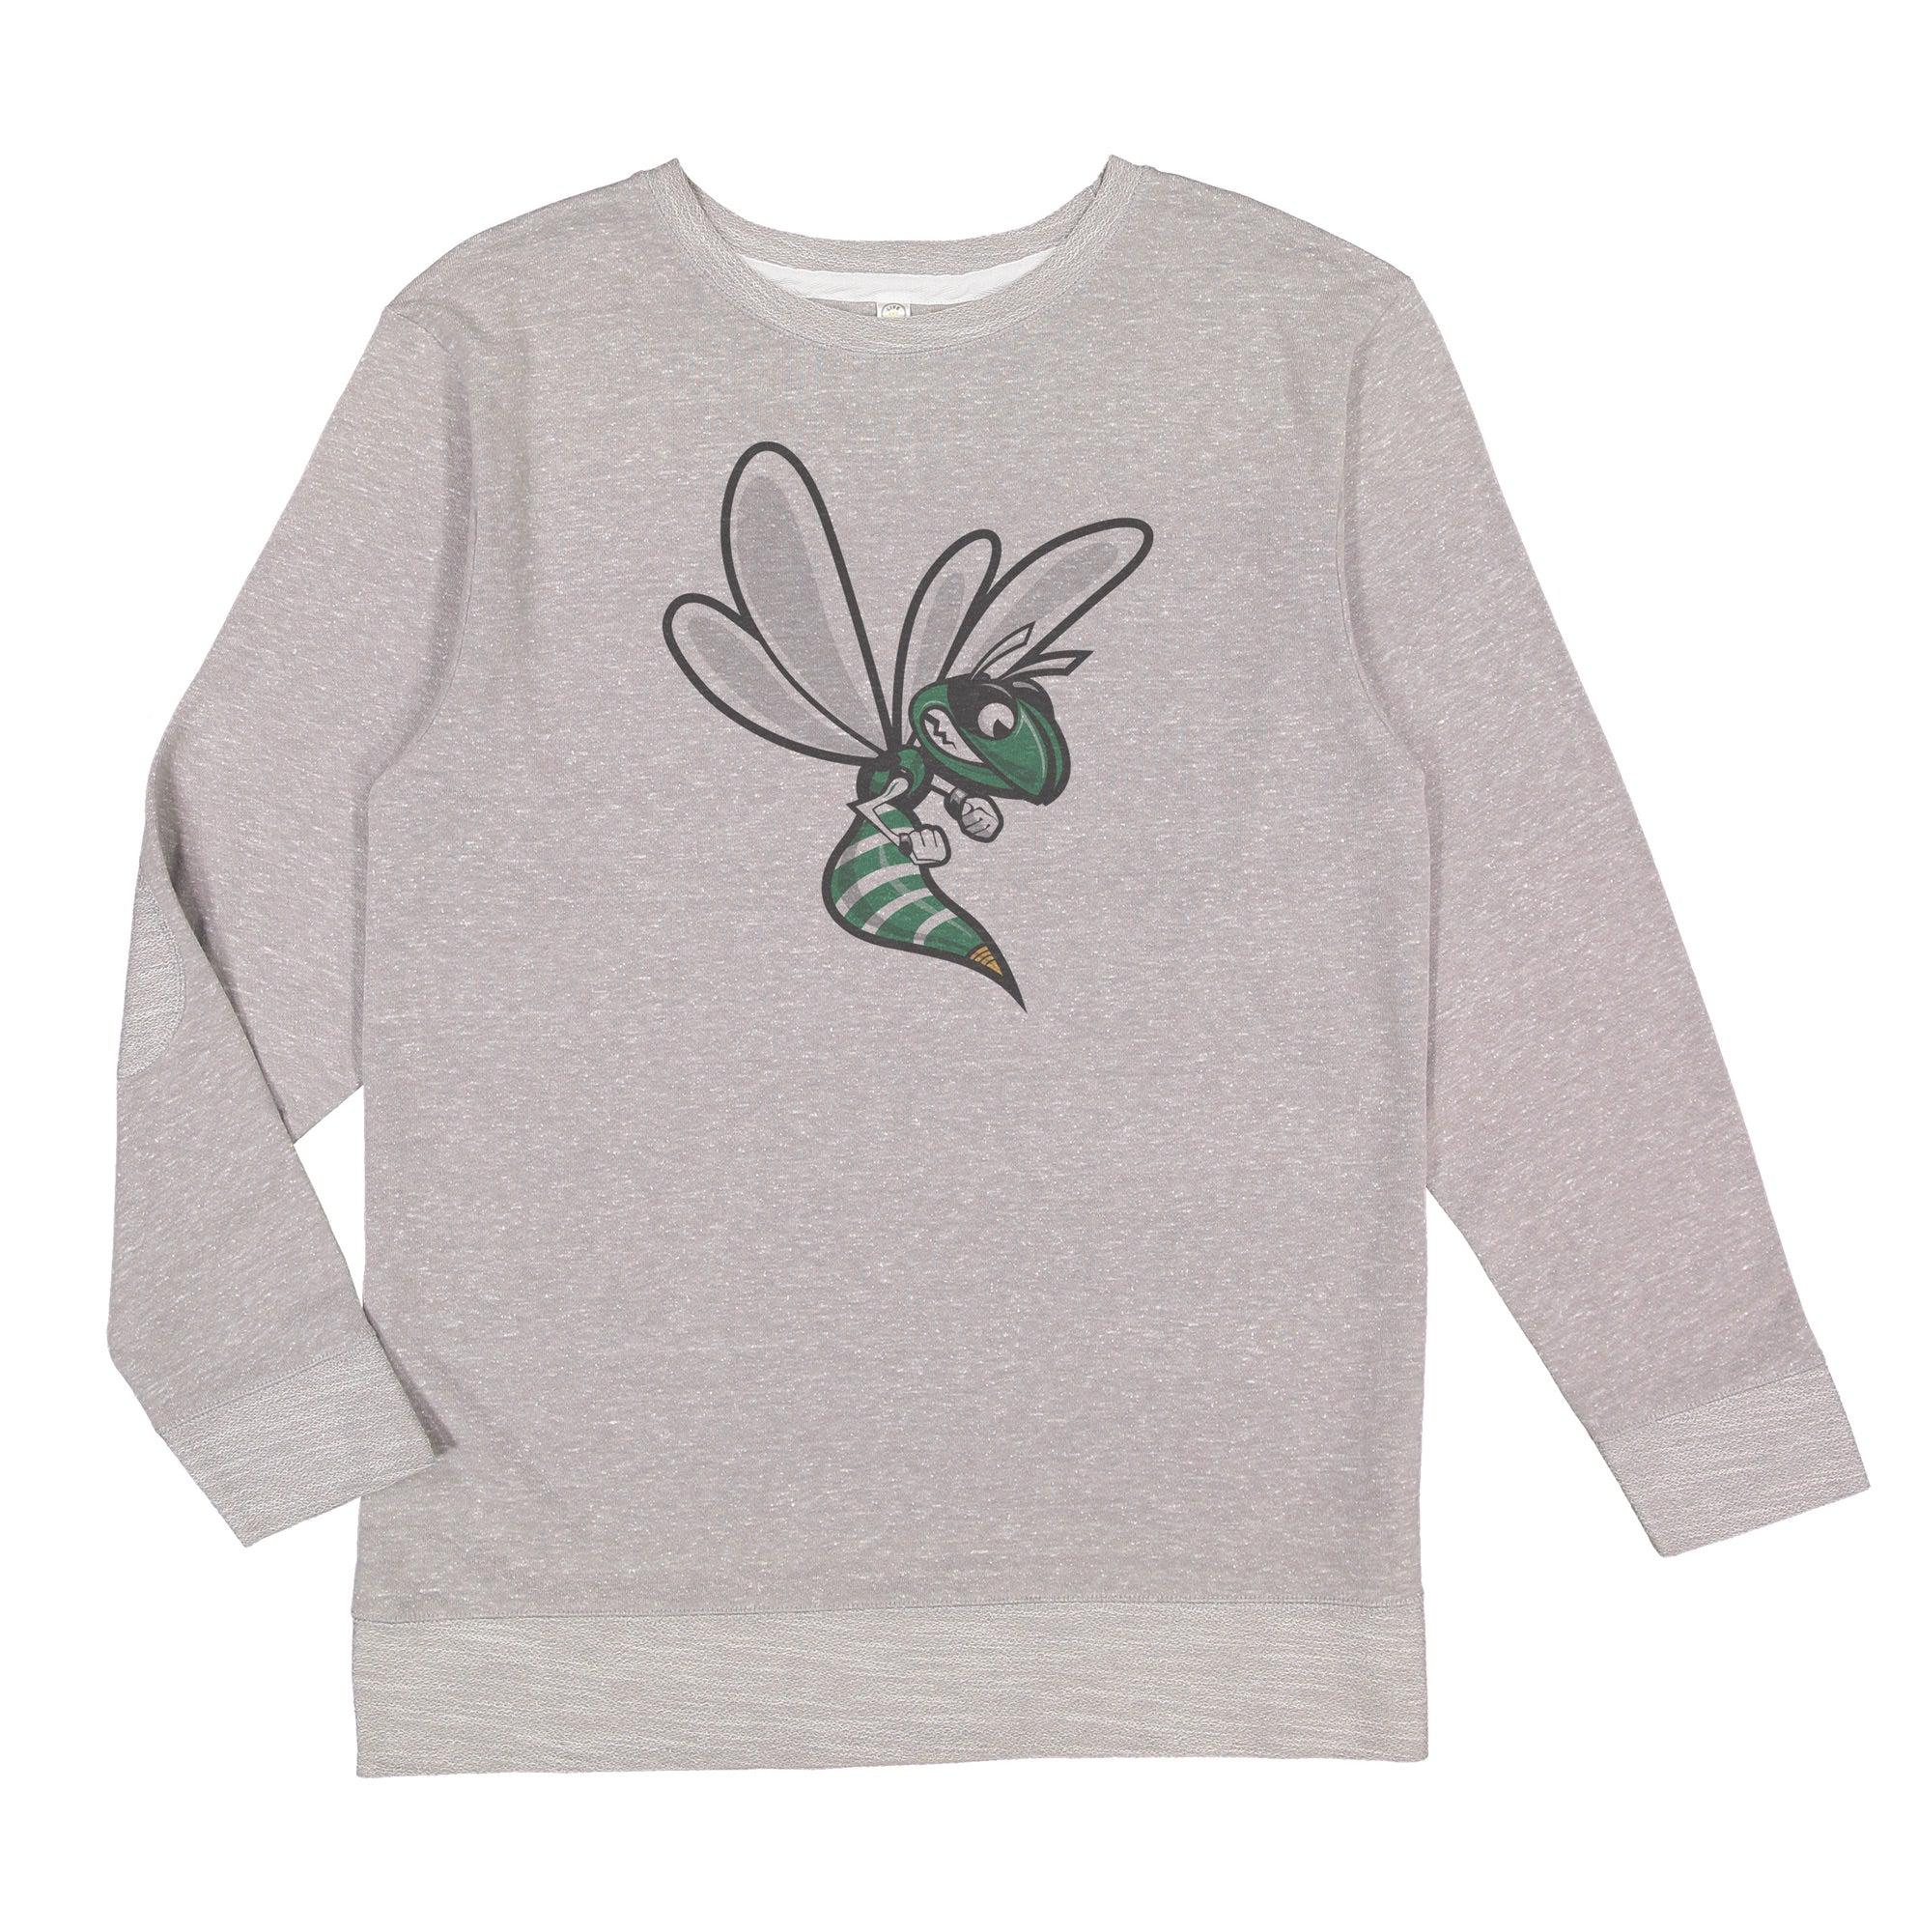 Hornet - Vintage Melange - Youth Sweater With Elbow Patches